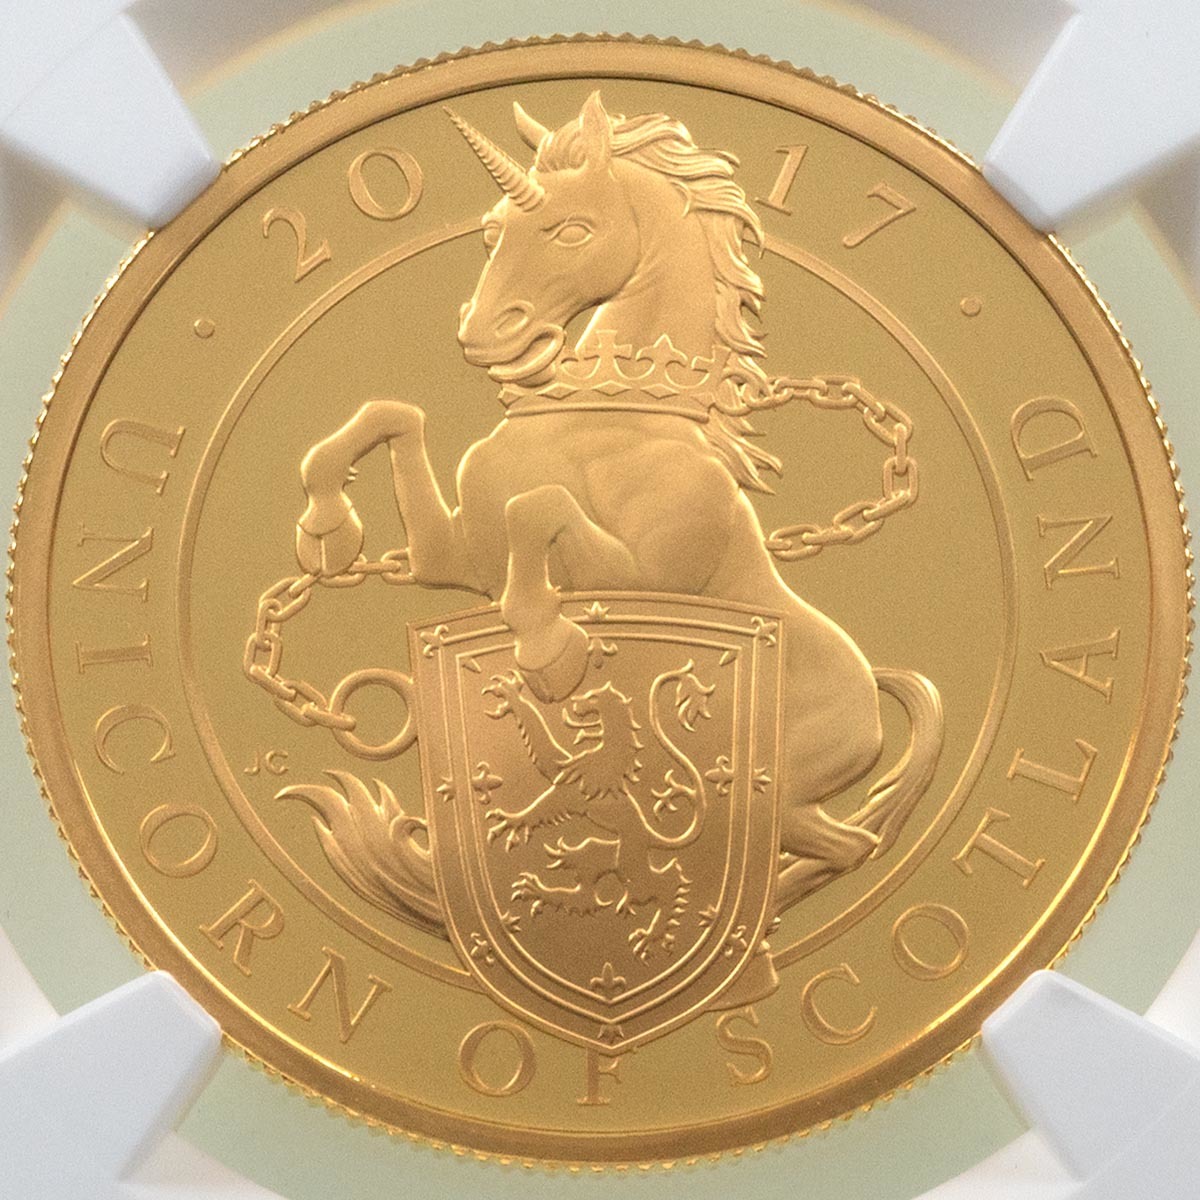 UK17QUGP 2017 Queen's Beasts Unicorn Of Scotland One Ounce Gold Proof Coin NGC Graded PF 69 Ultra Cameo Reverse